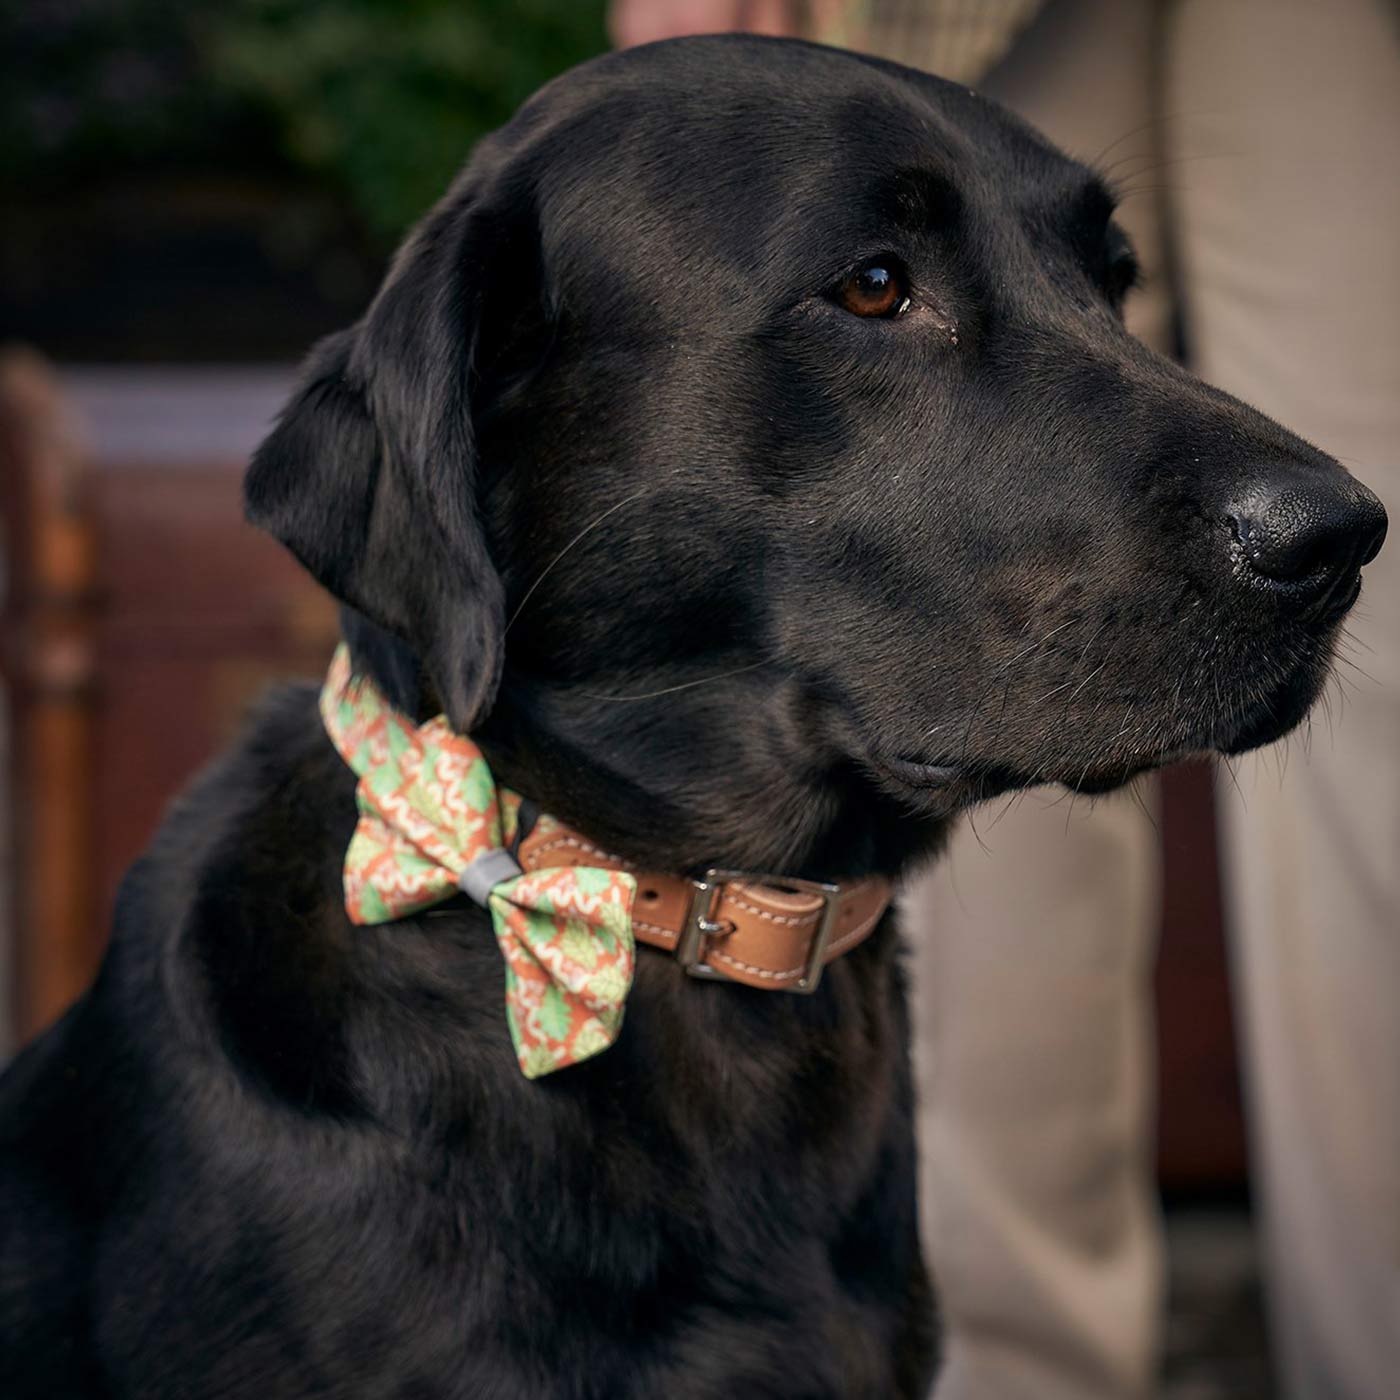 [colour:oak leaf] Set & accessorise your pooch ready for a stylish dog walk with Hiro + Wolf X L&L Dog Bow Tie, the perfect dog walking accessory! Made using strong webbing lining to provide extra strength! Available in 3 stylish designs and one sizes at Lords & Labradors